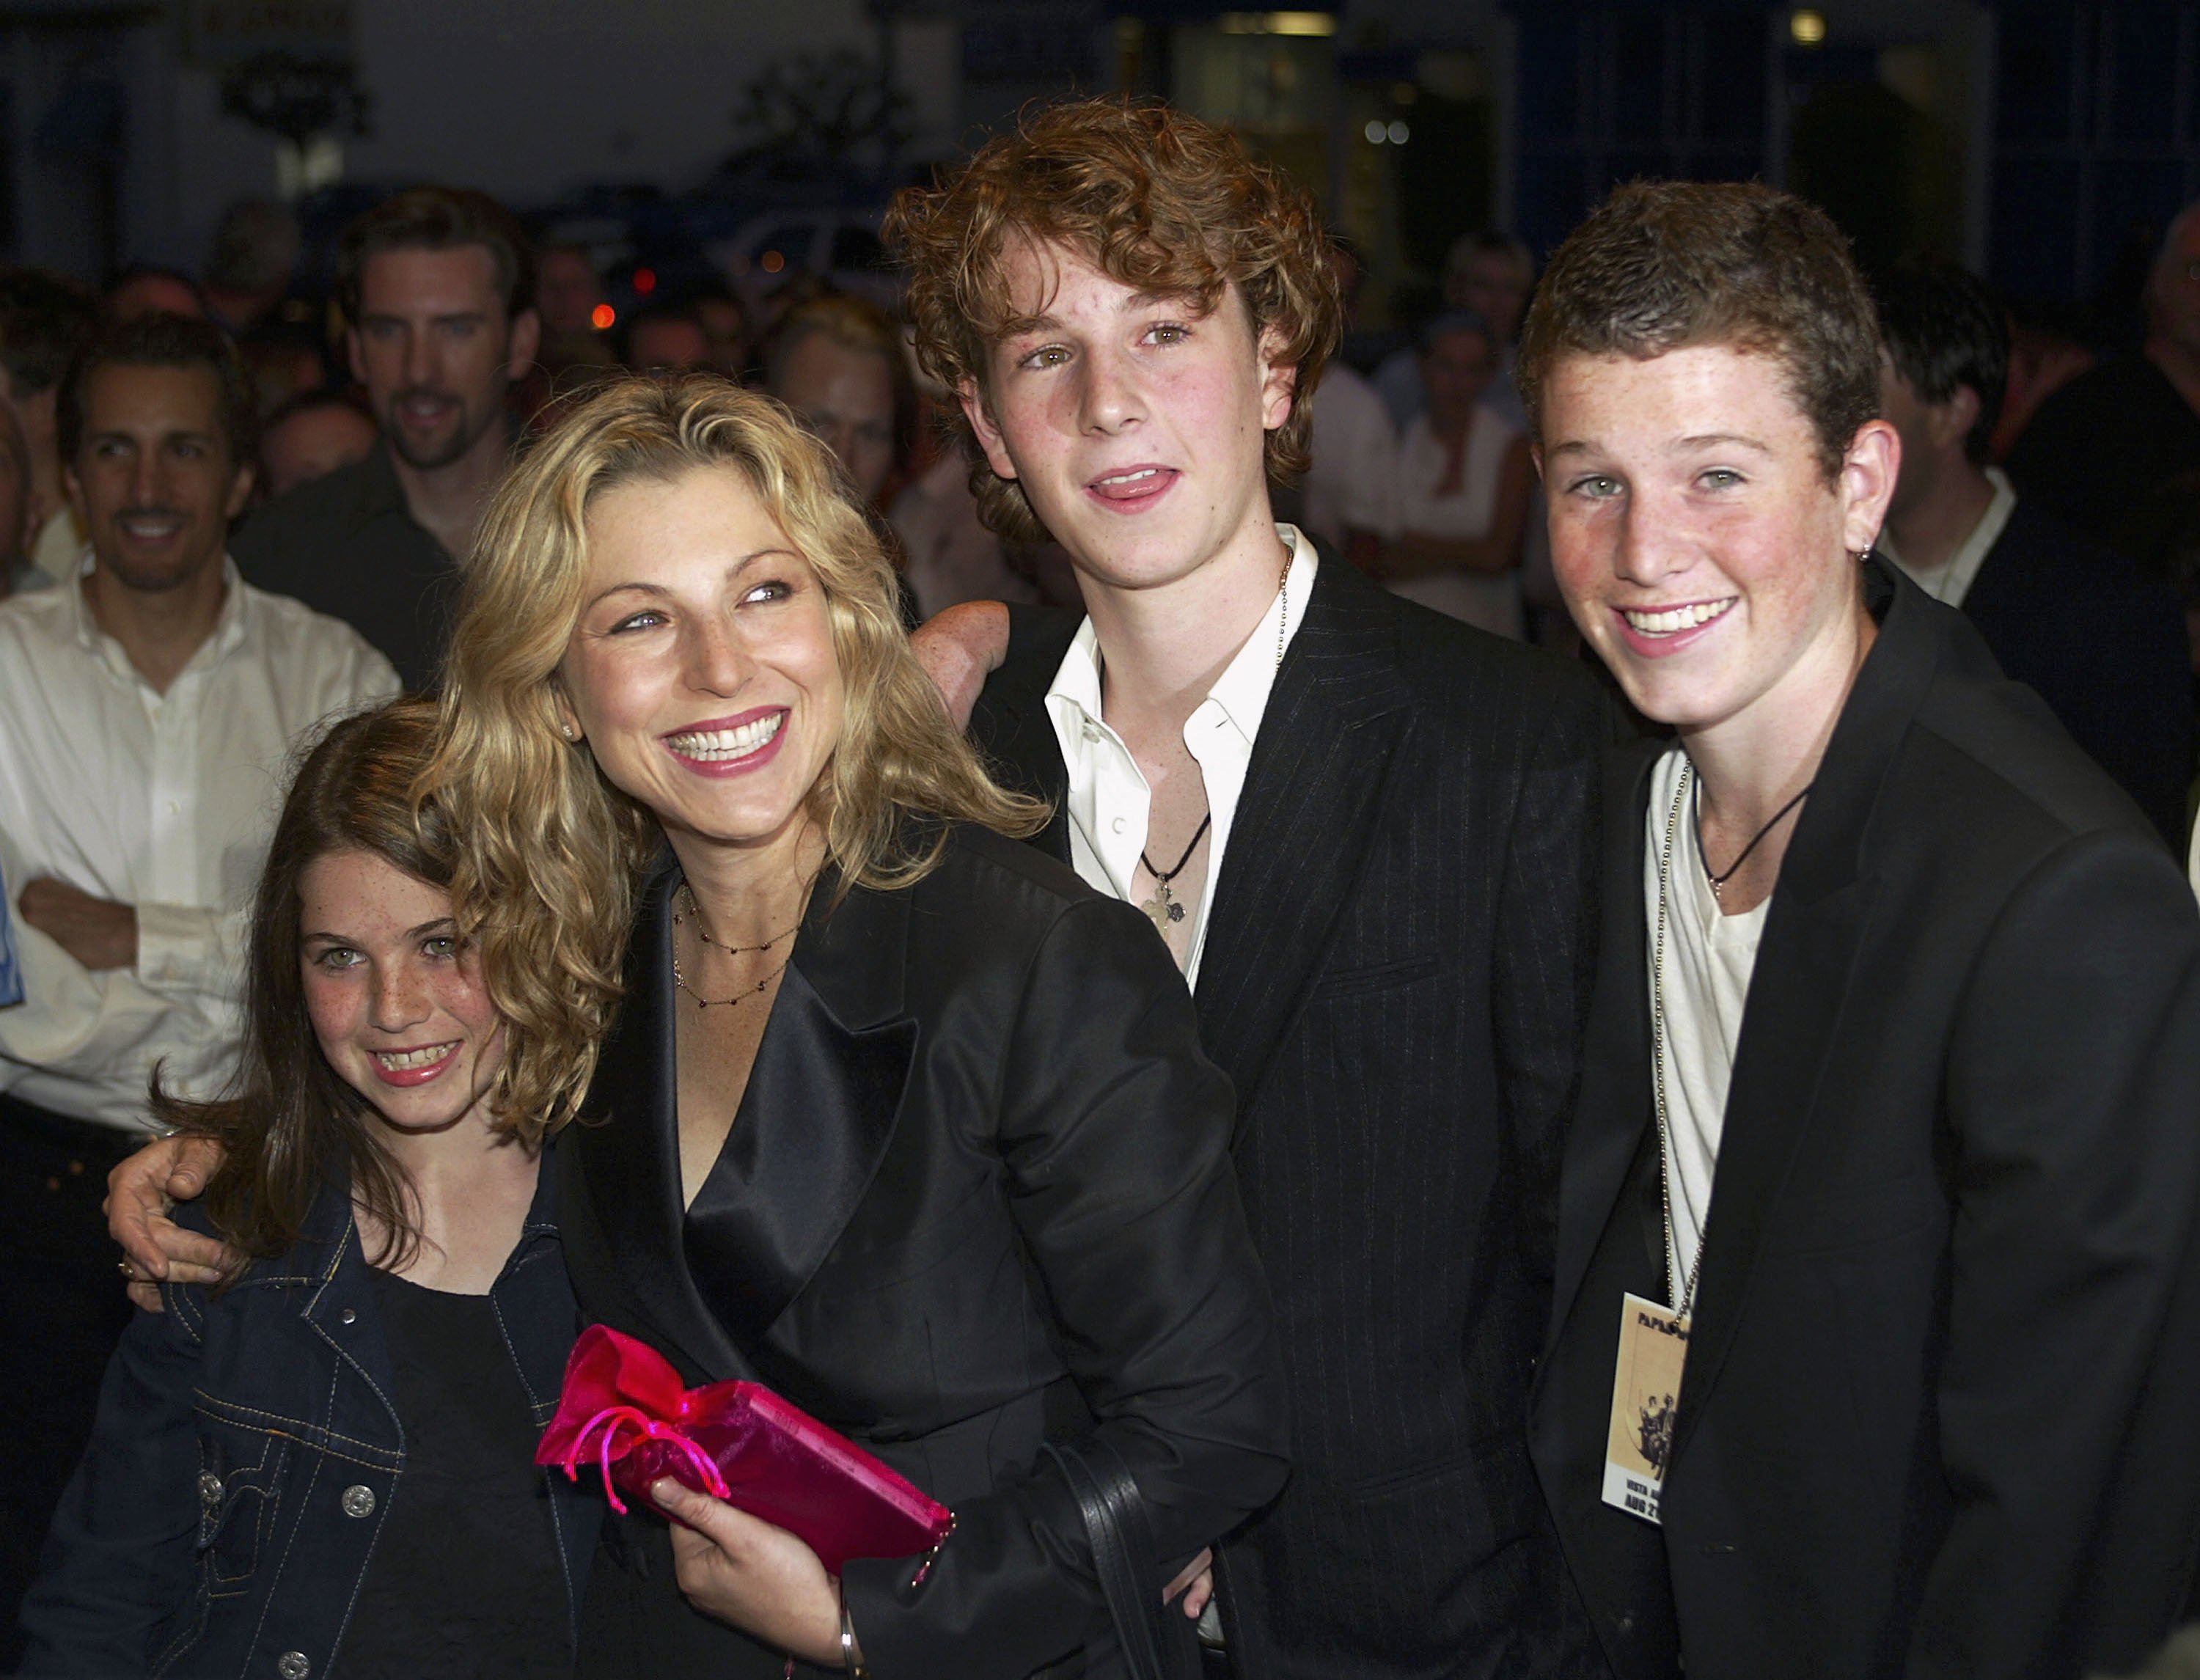 Tatum O'Neal and her children, Emily, Kevin and Sean at the 30th anniversary of "Paper Moon." 2003, Los Angeles, California. | Photo: Getty Images